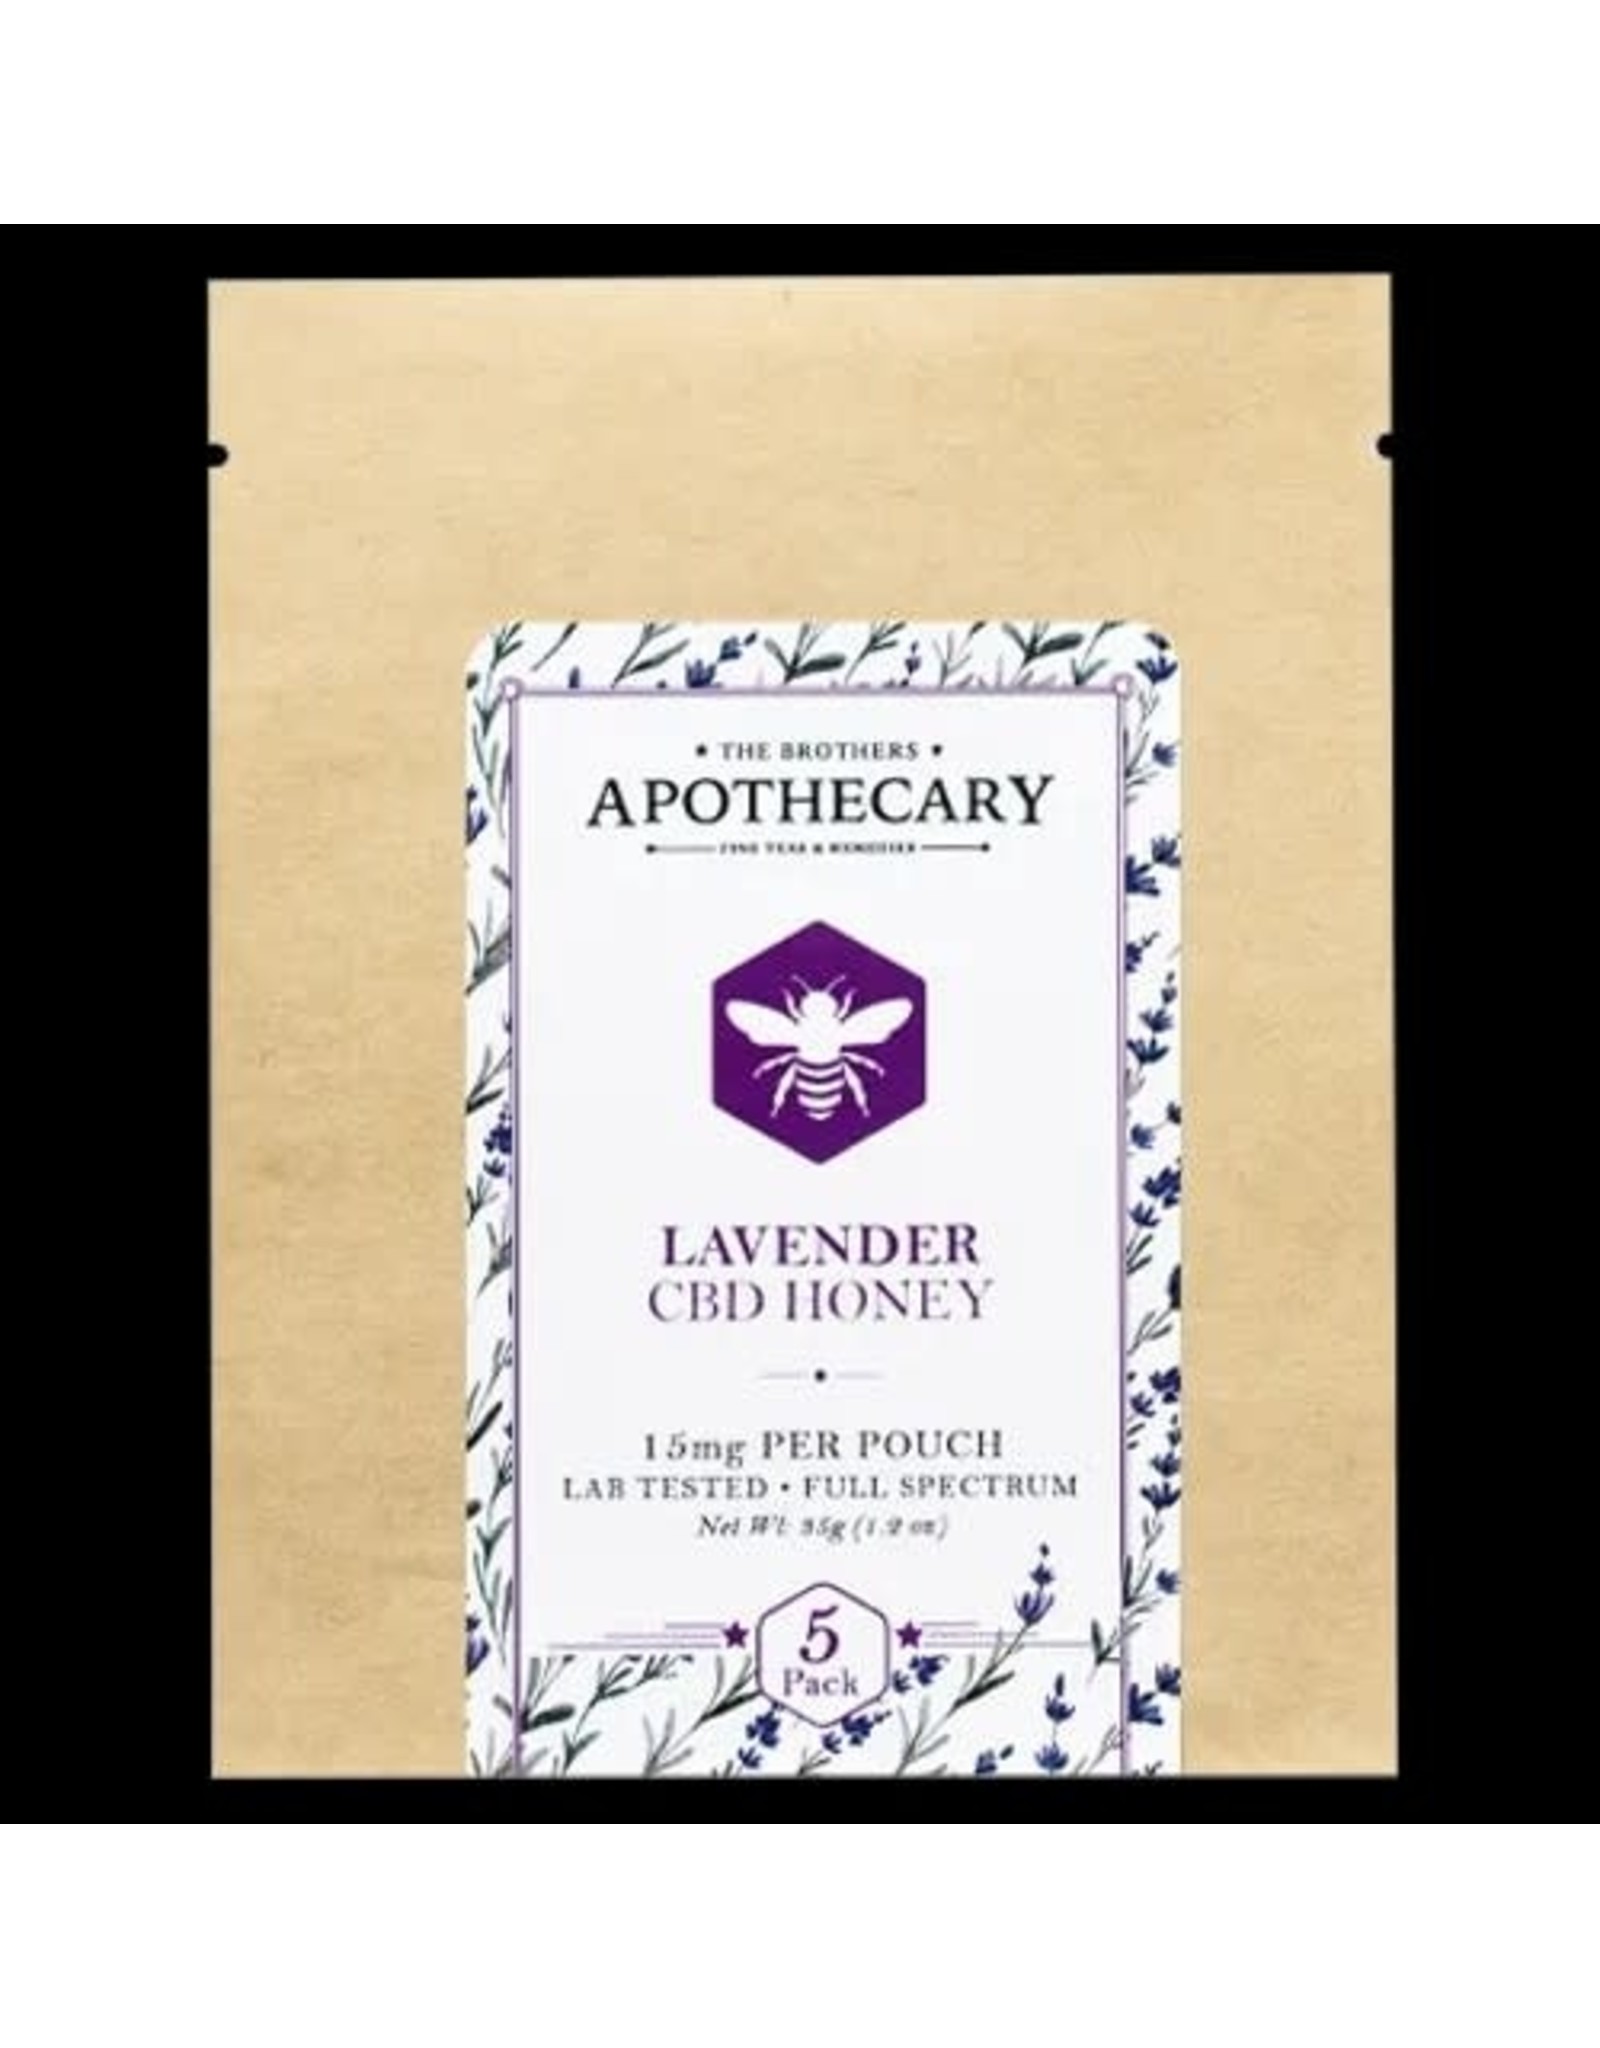 The Brothers Apothecary Brothers Organic Lavender CBD Honey